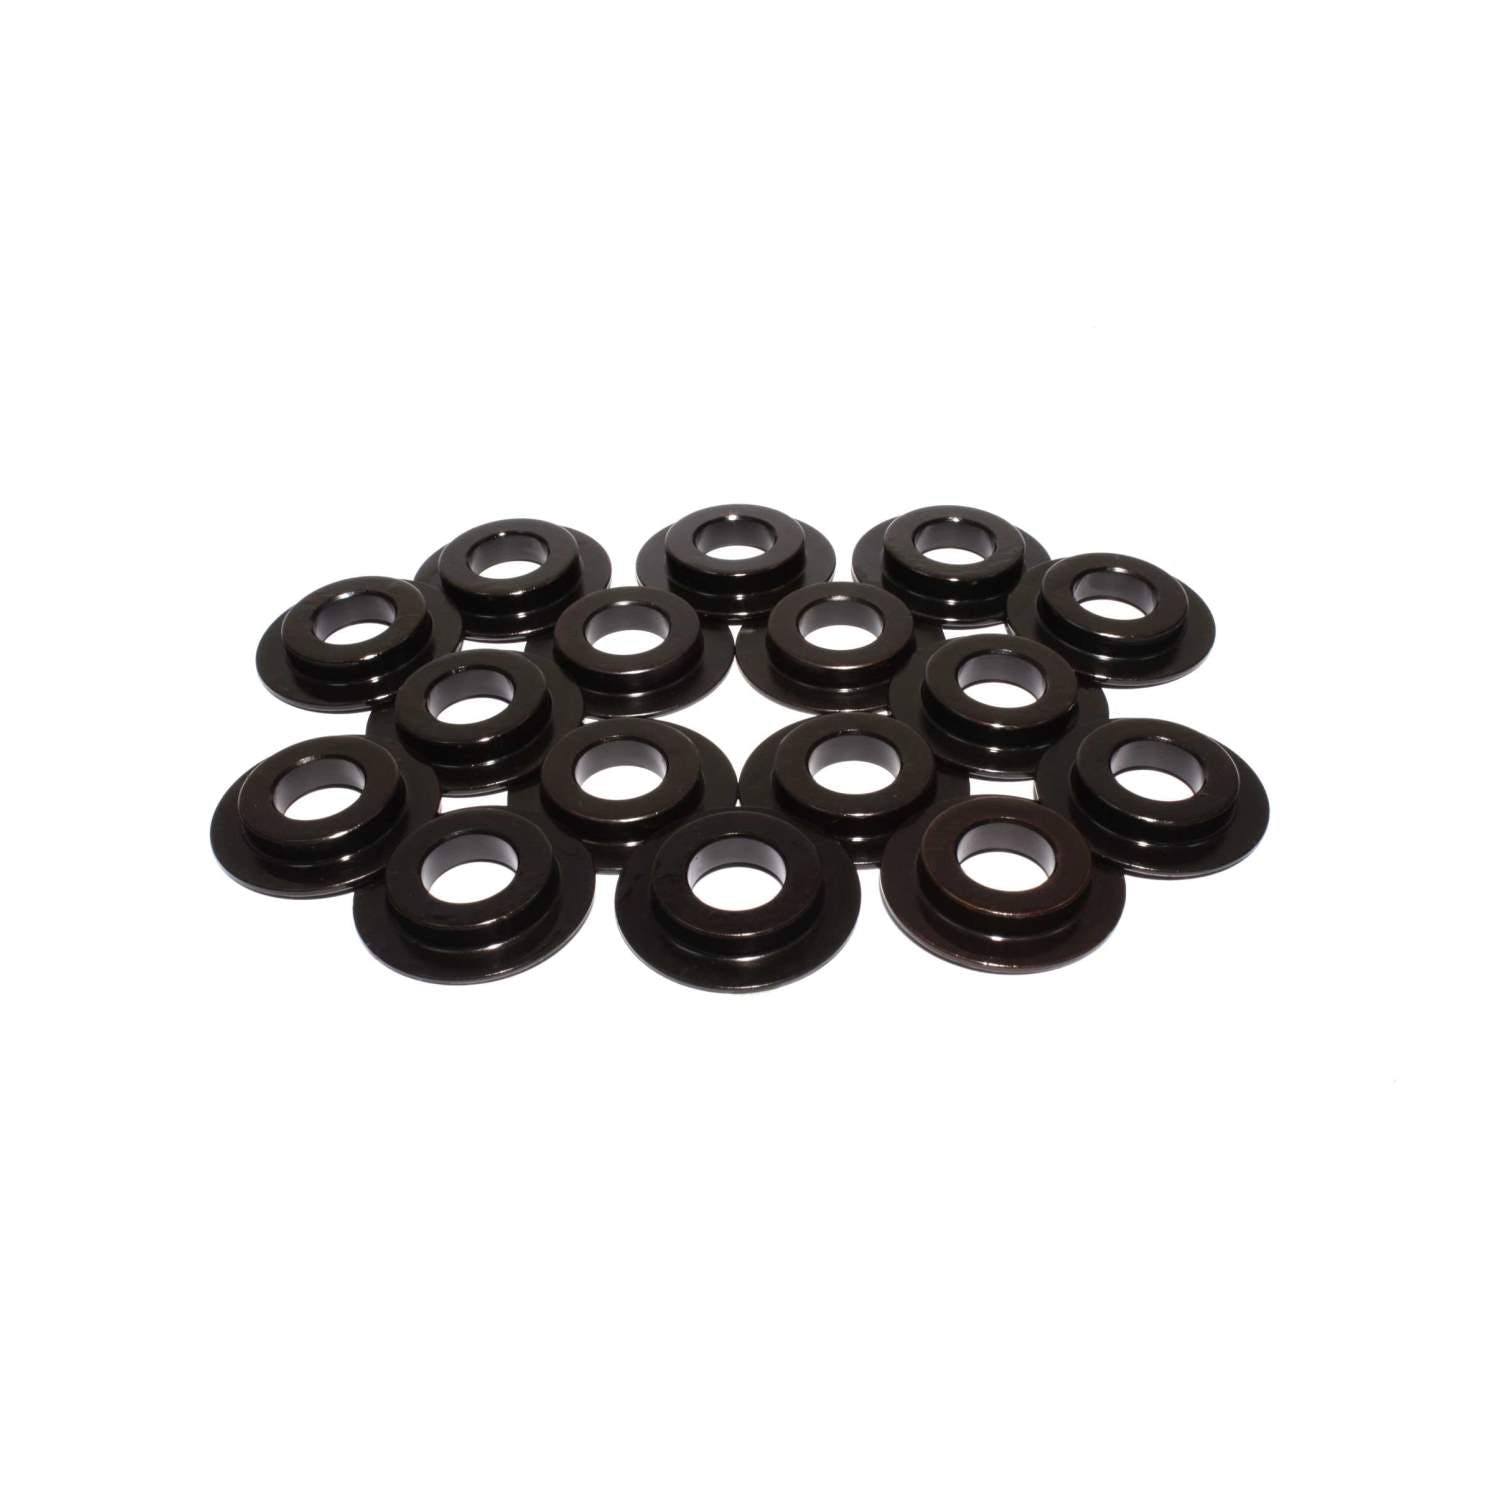 Competition Cams 4669-16 ID Spring Locator Set of 16 - 1.660 inch OD, .570 inch ID, .060 inch Thickness